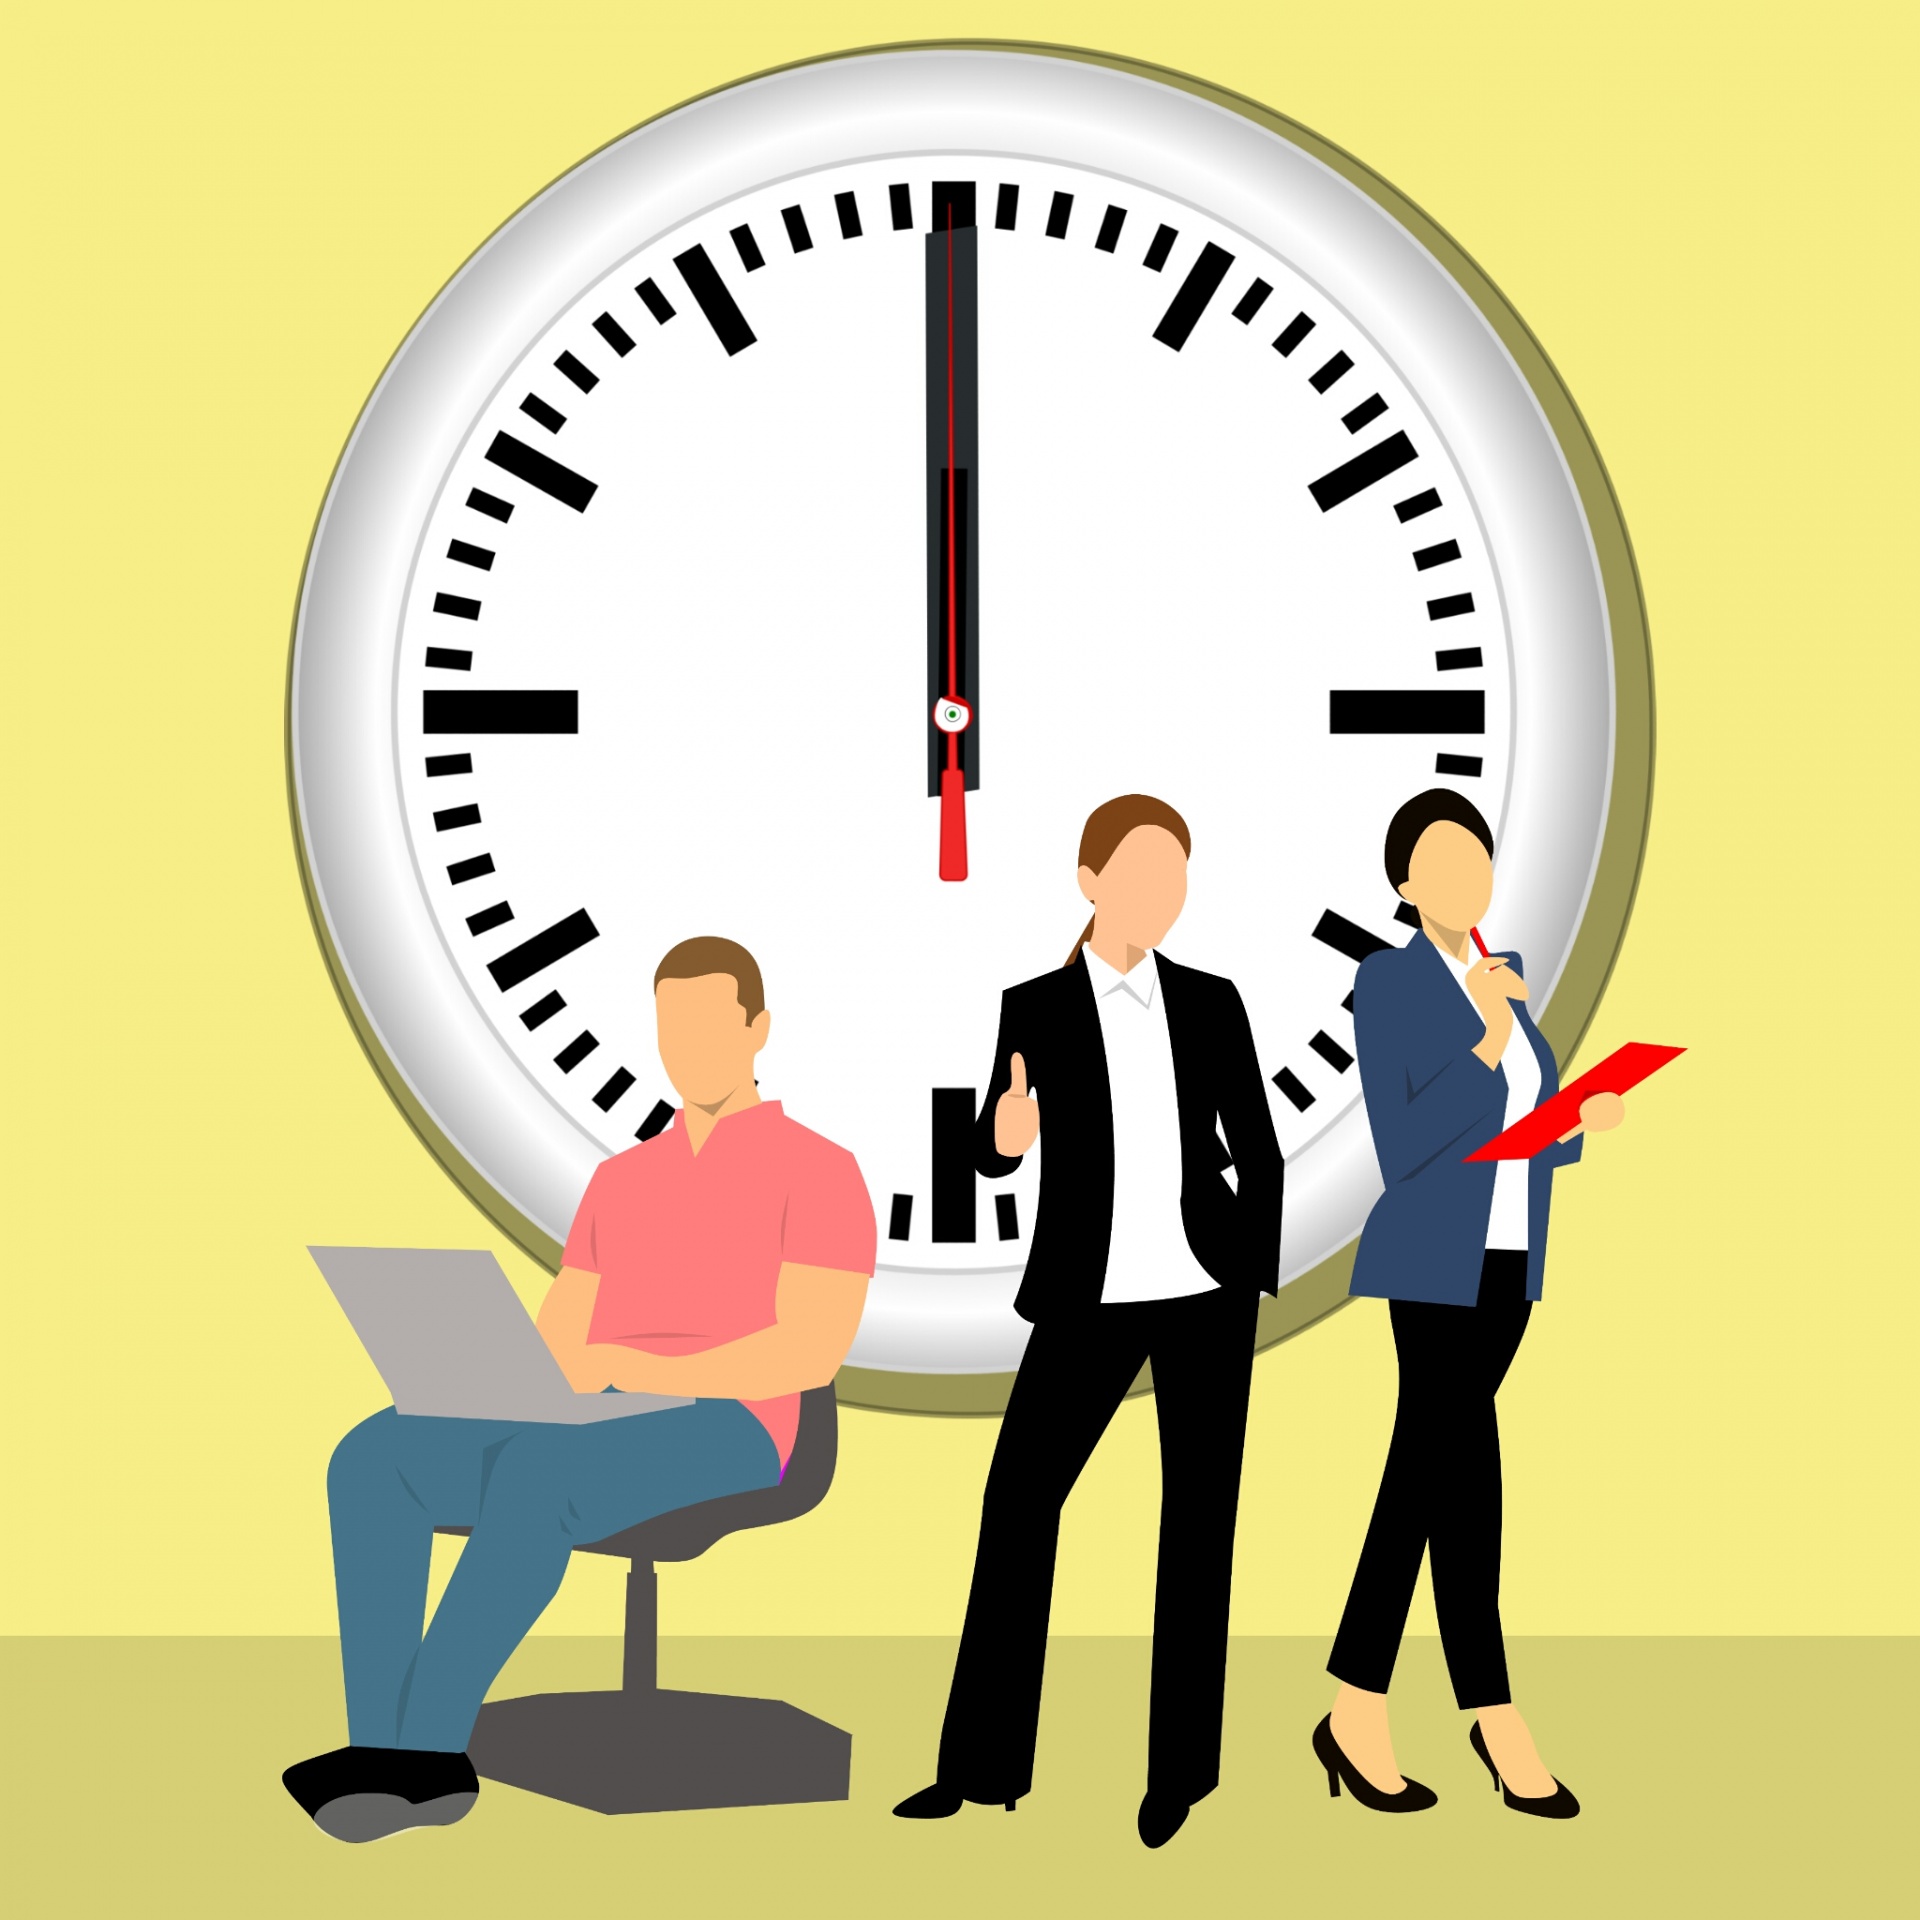 time, business, clock, man, people, office, adult, deadline, sign, criticality, late,business people,team work,working together ,at office,project ,